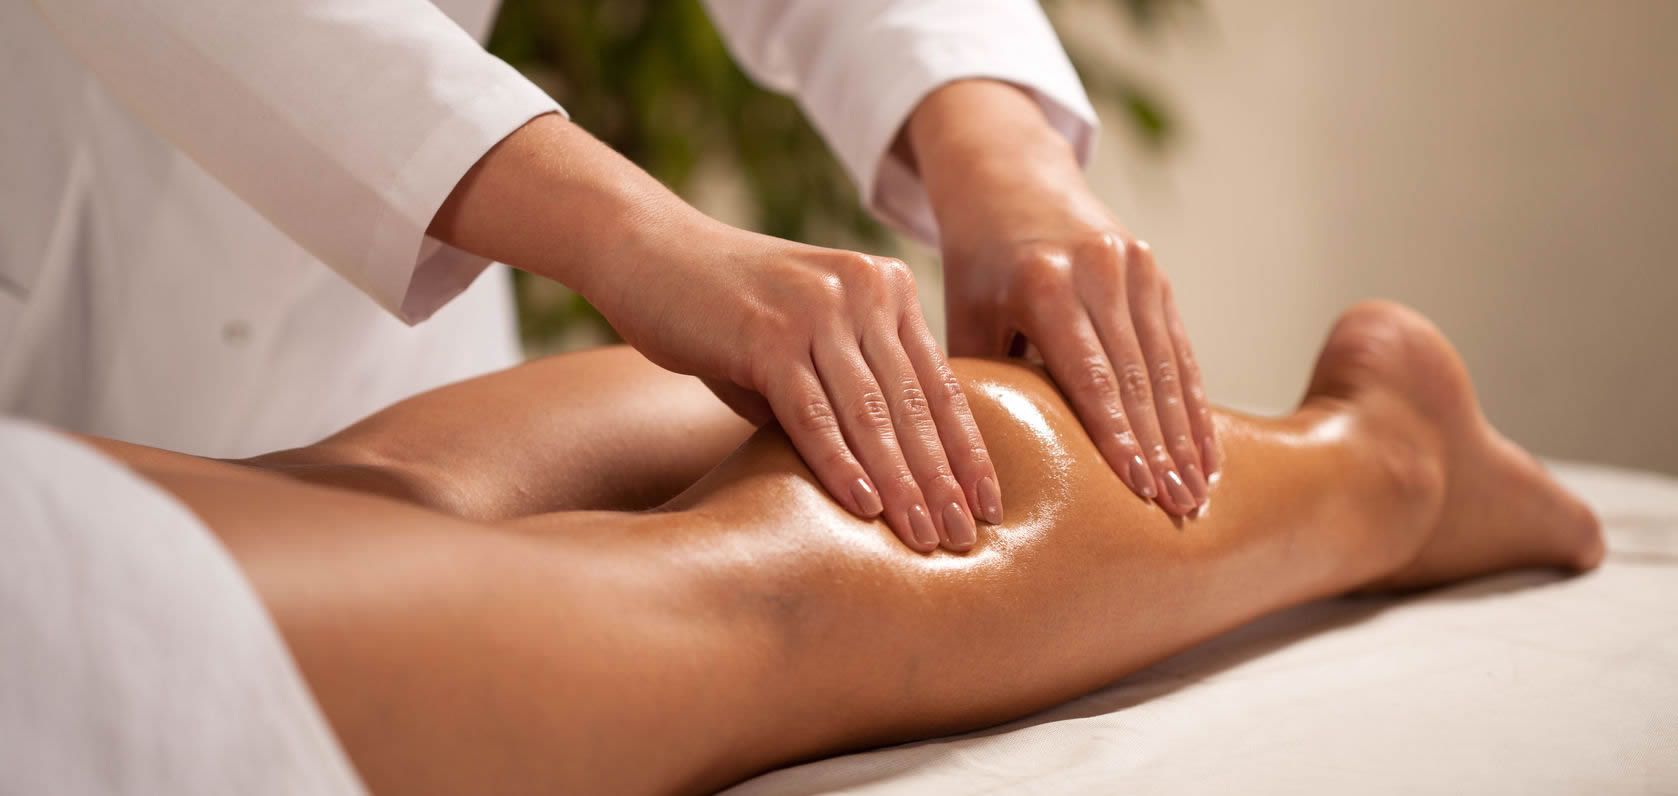 Give your body some relaxation with Swedish Massage